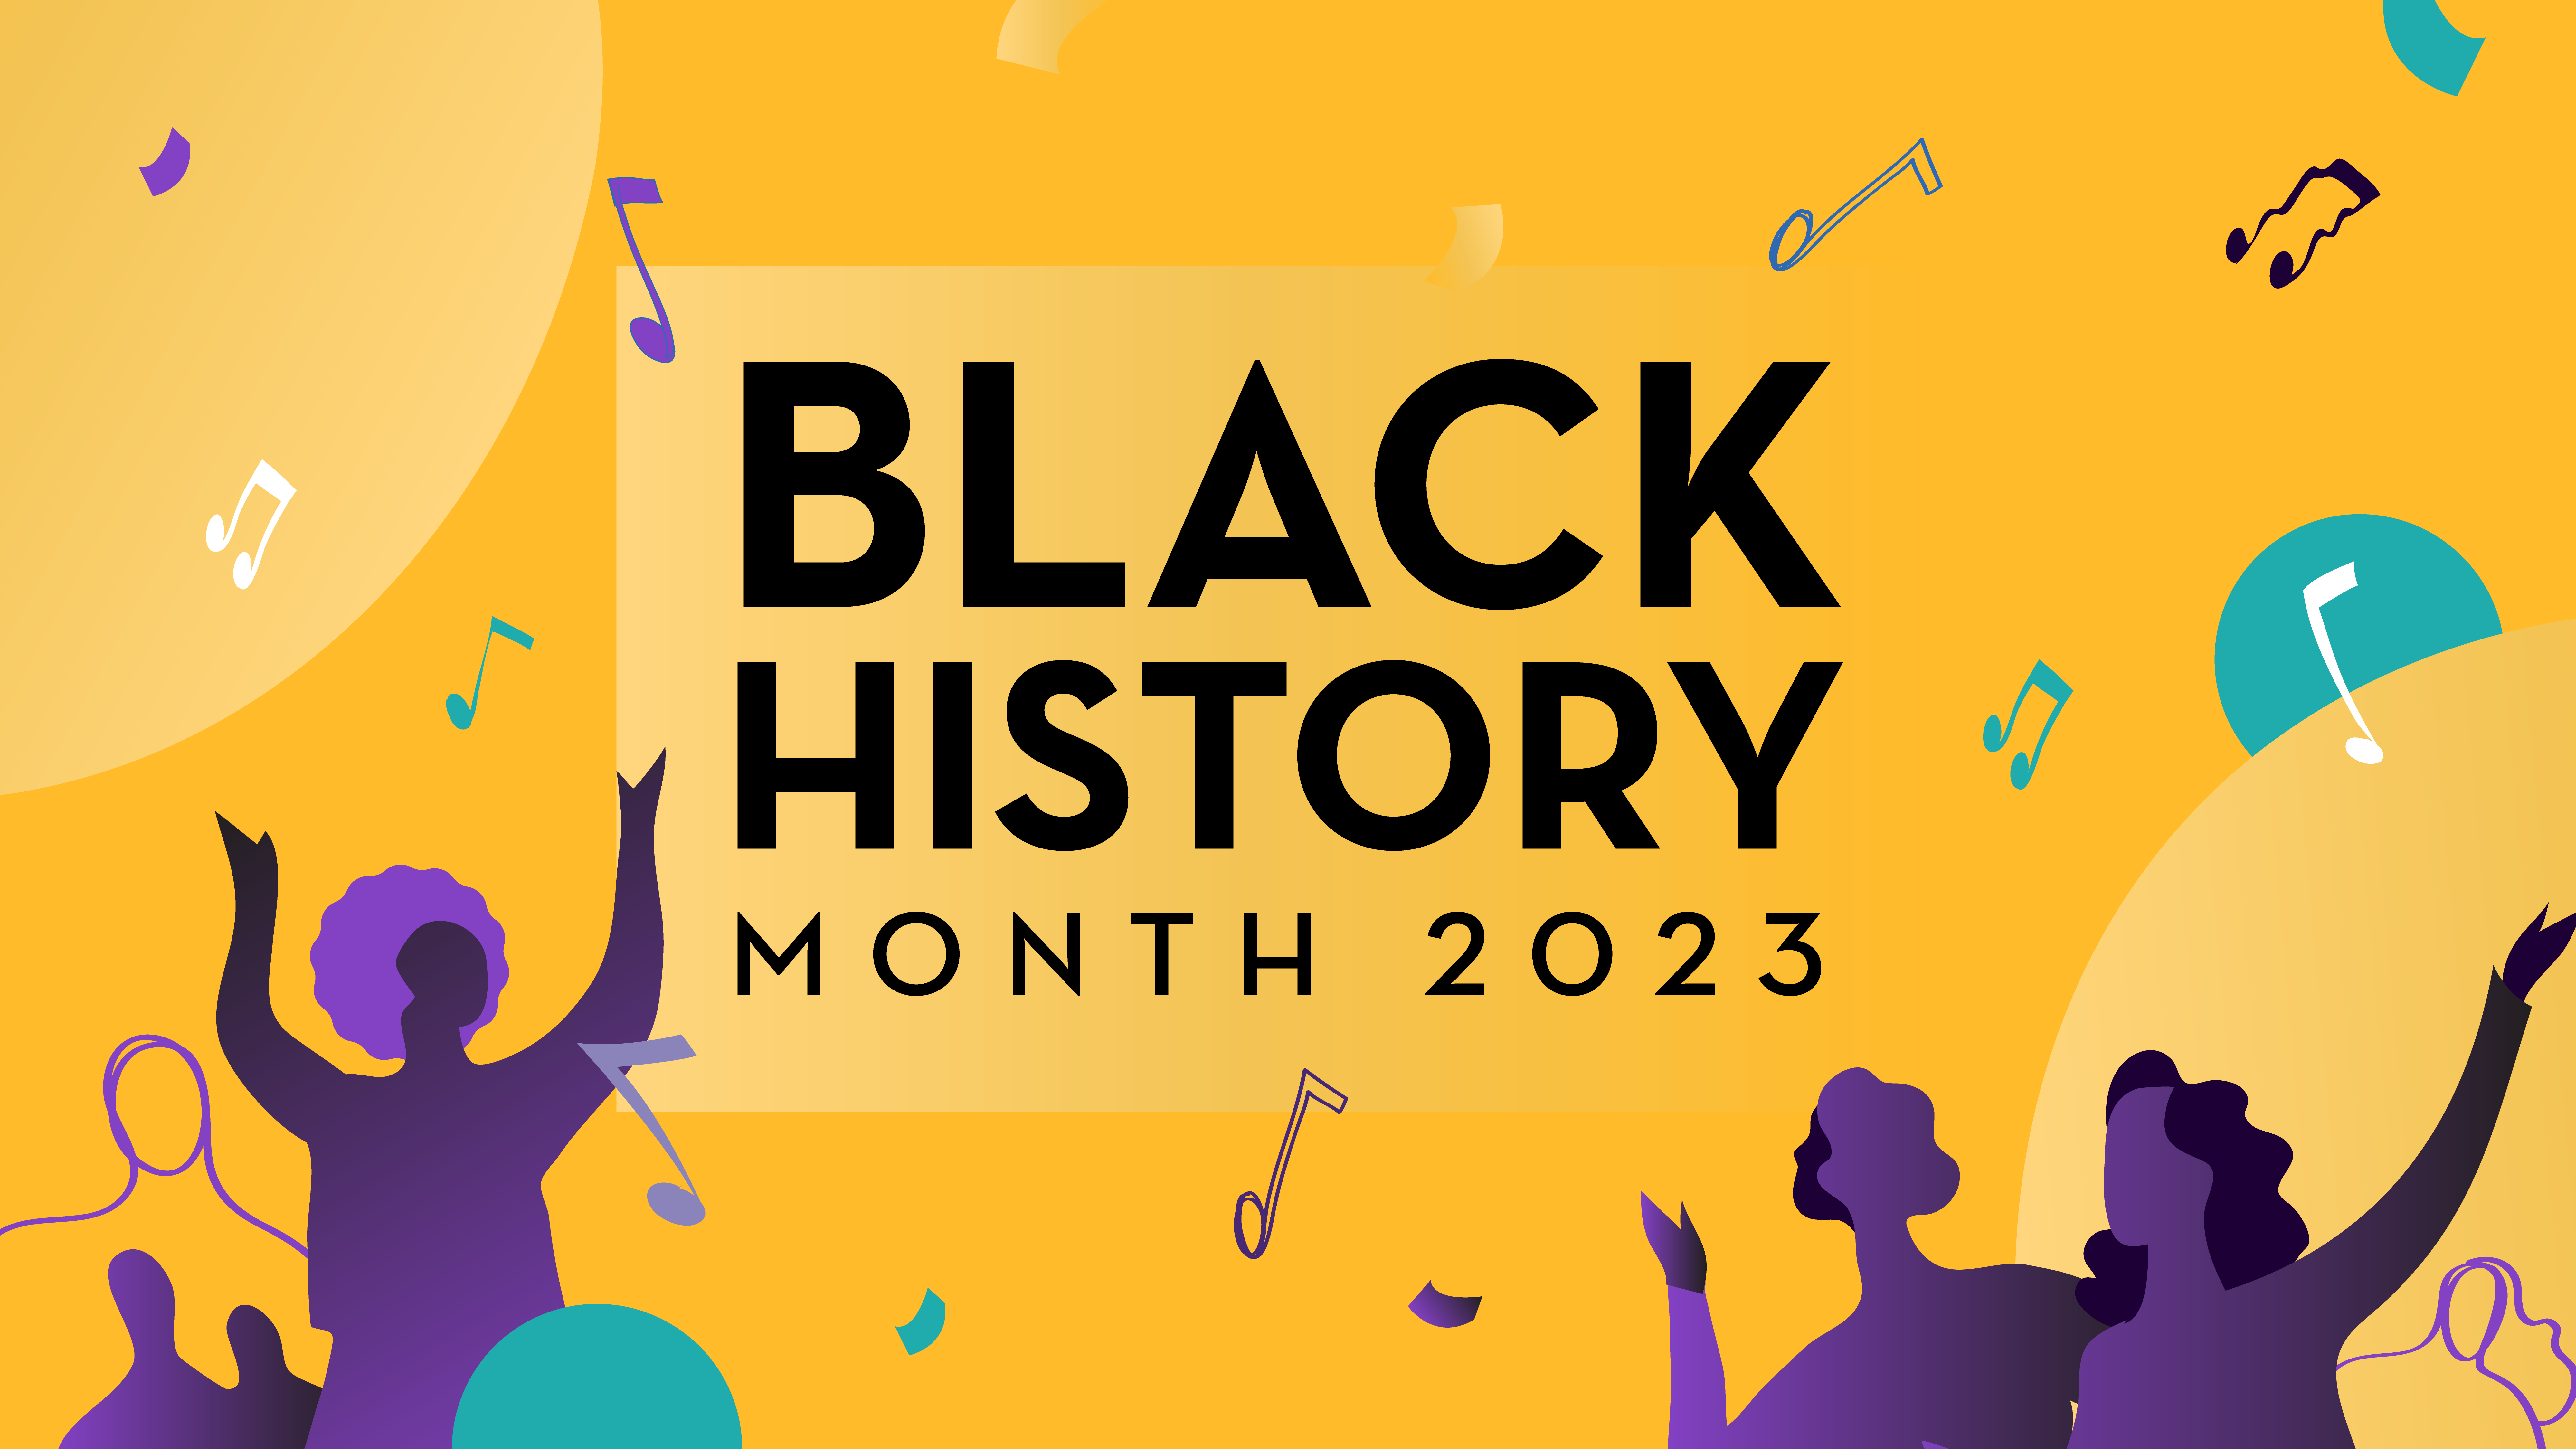 Black History Month 2023 on yellow background with purple music notes and figures